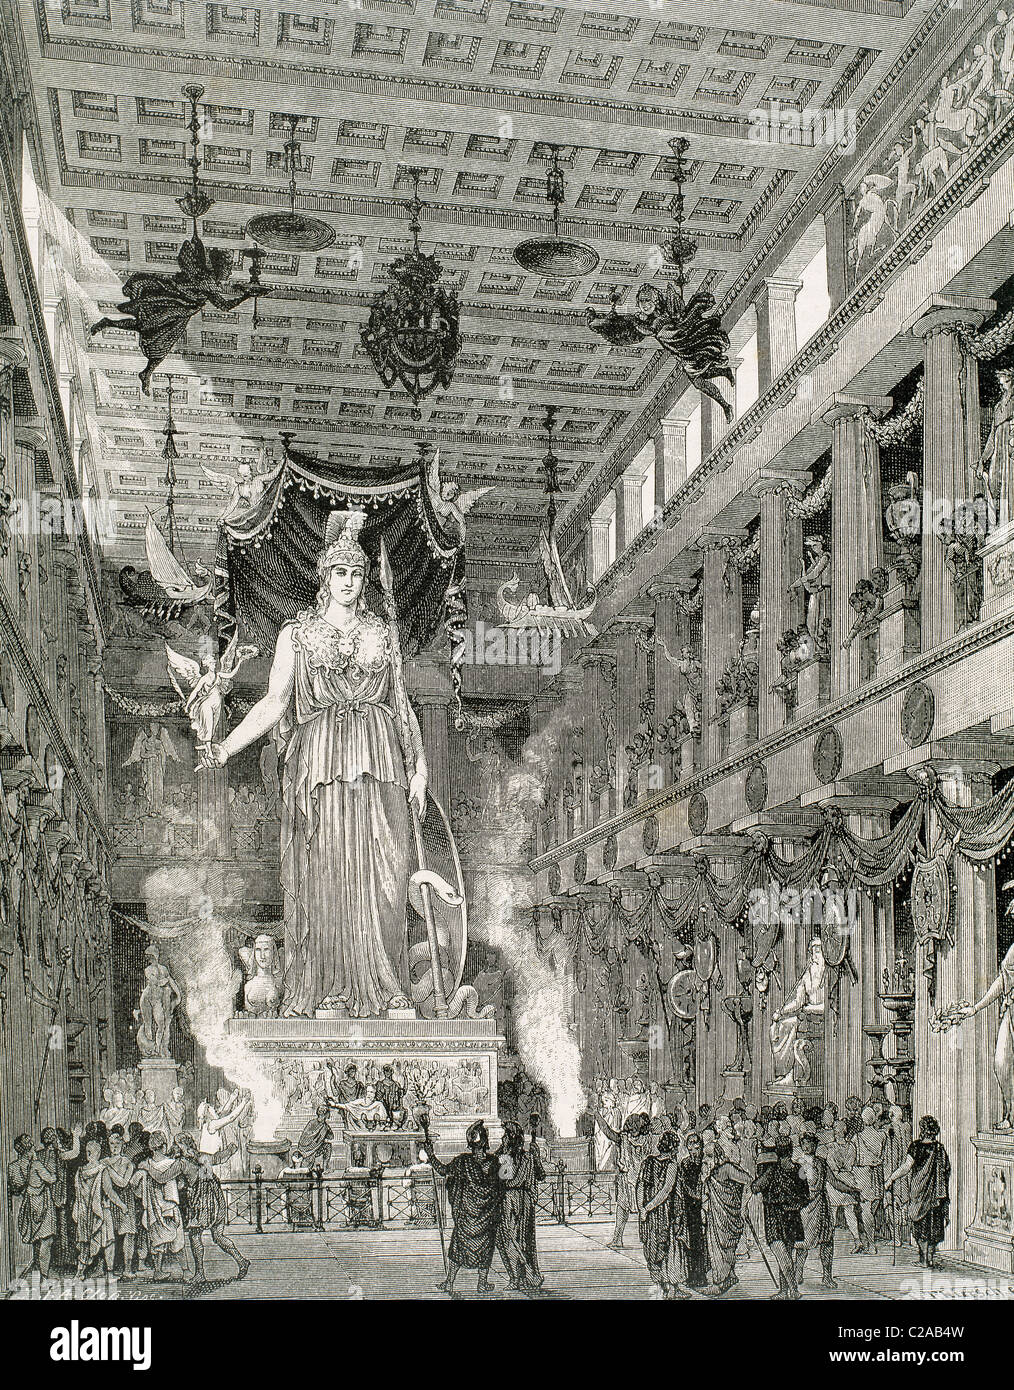 History of Greece. Athens. Reconstruction of the Parthenon. Cella with the statue of the goddess Parthenos. Stock Photo